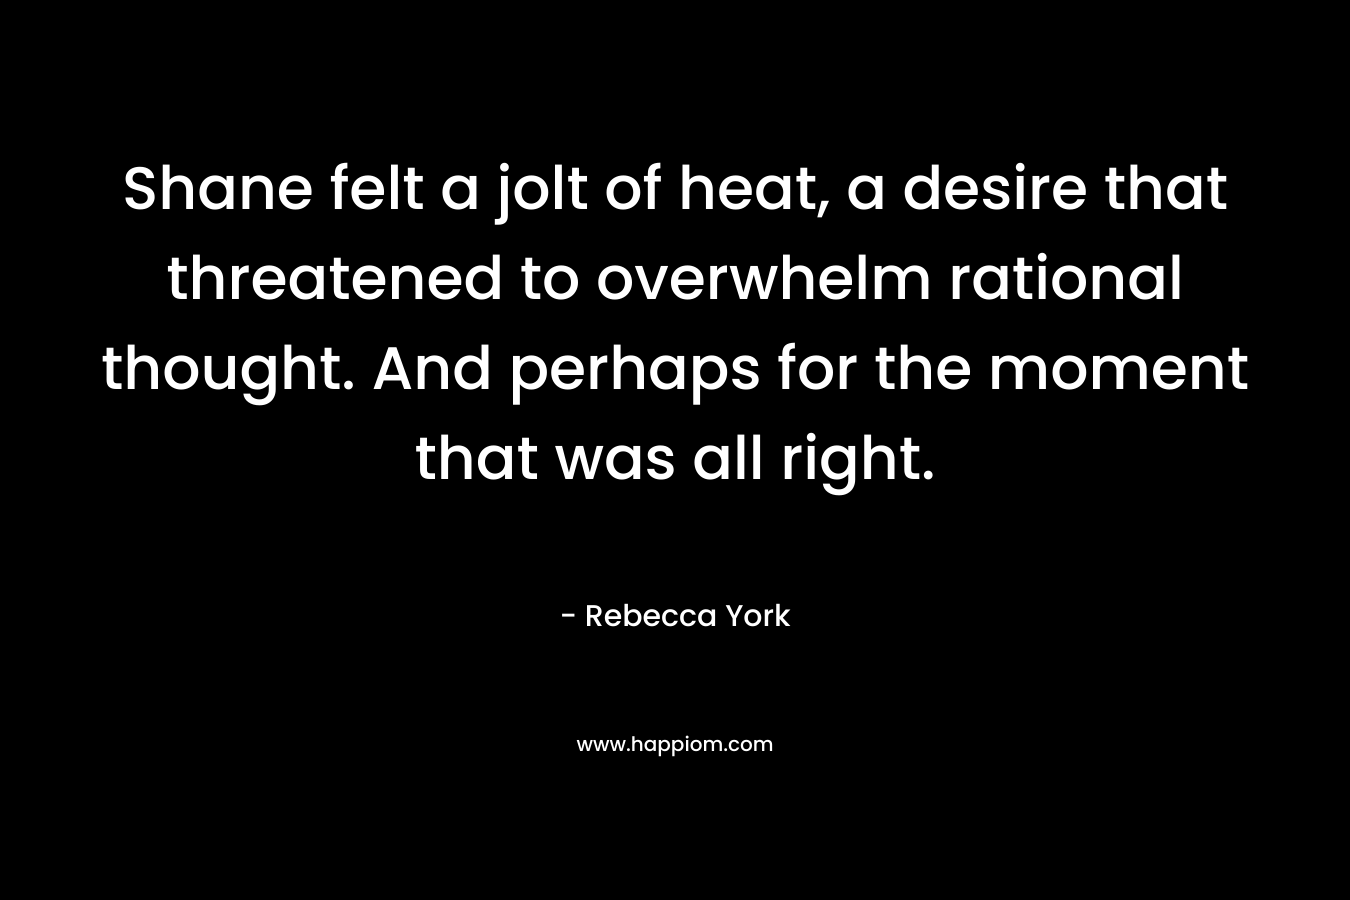 Shane felt a jolt of heat, a desire that threatened to overwhelm rational thought. And perhaps for the moment that was all right. – Rebecca York